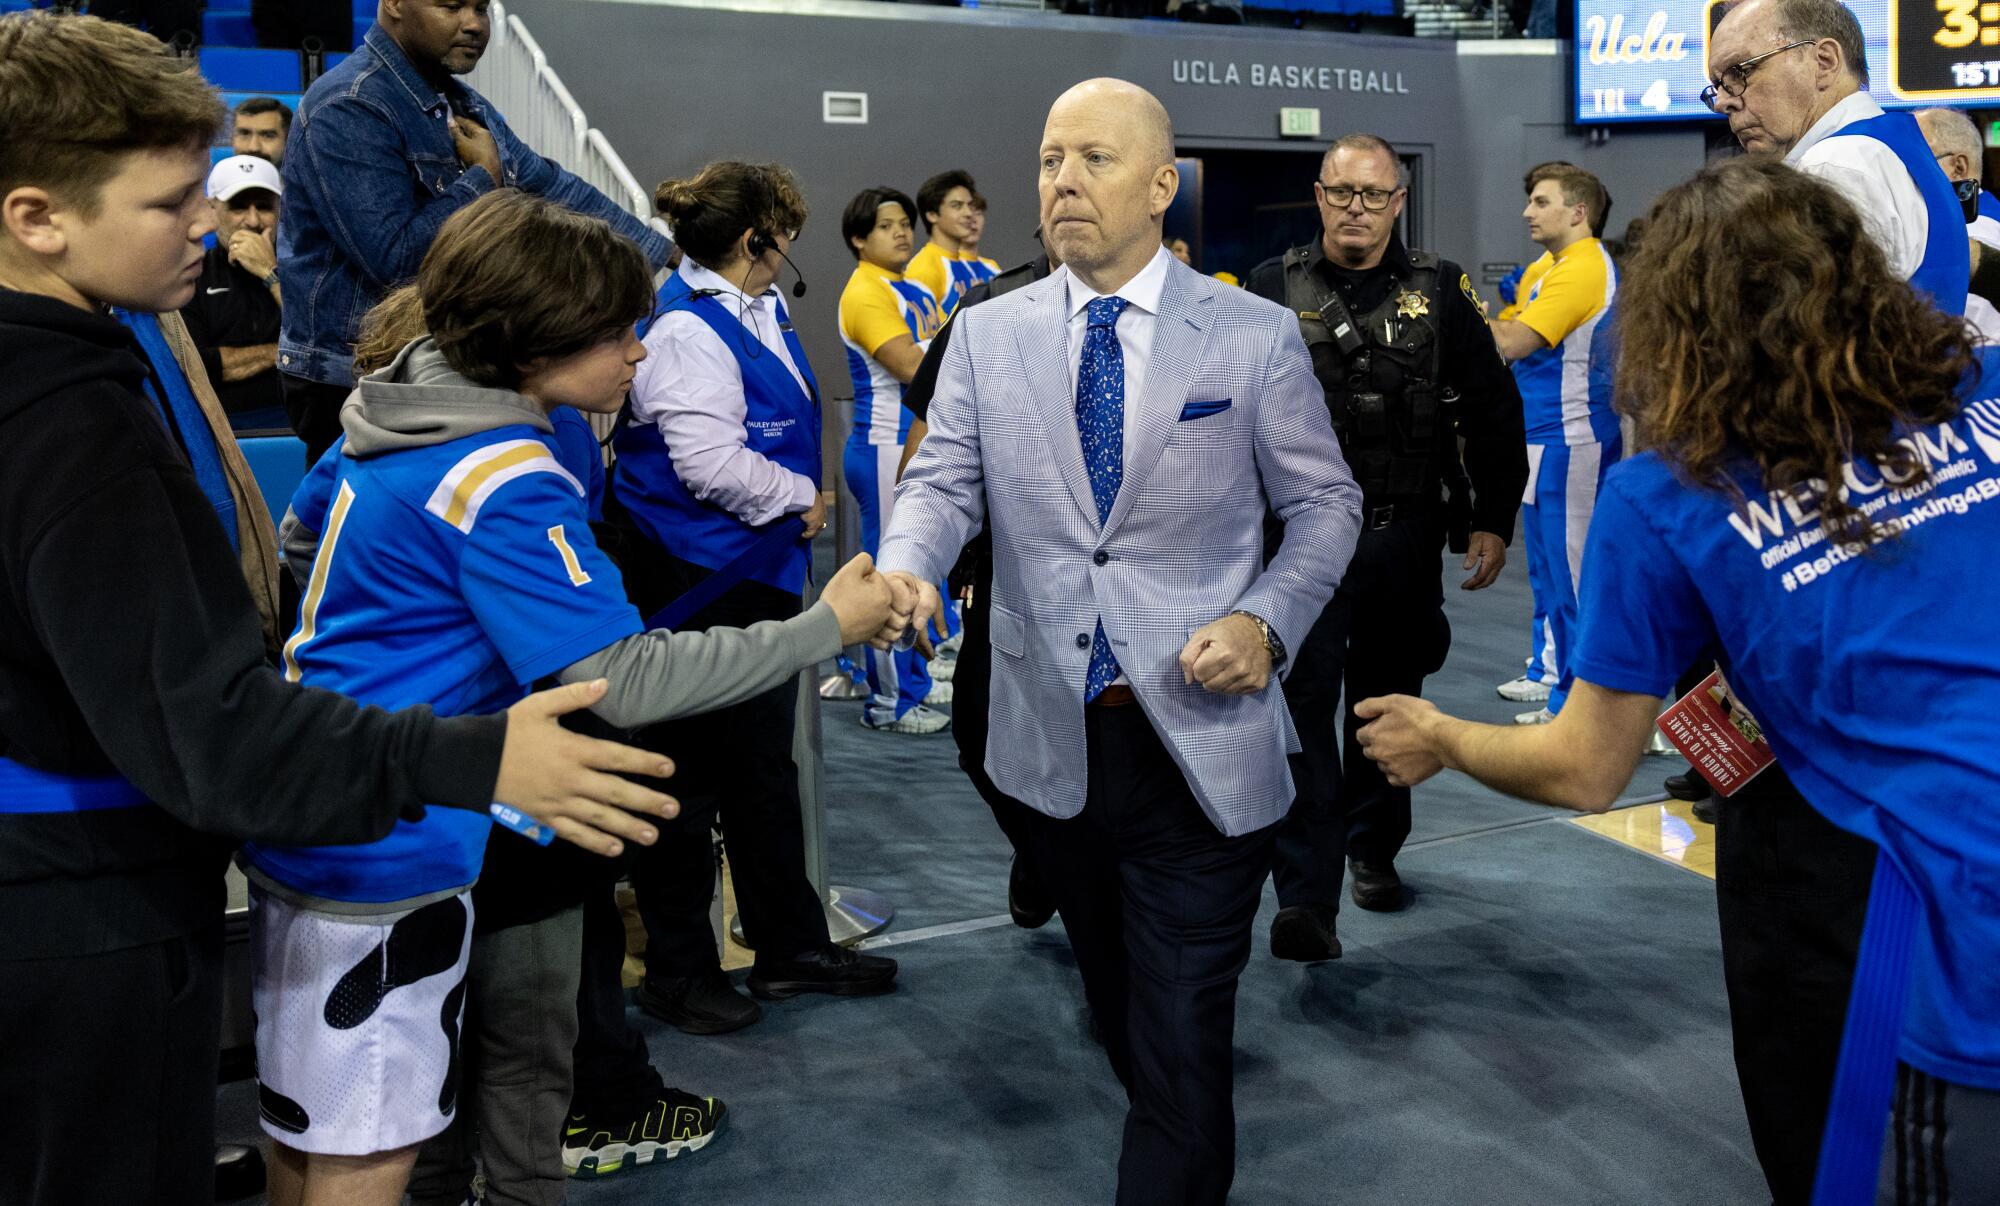 UCLA coach Mick Cronin fist-bumps fans before a game.